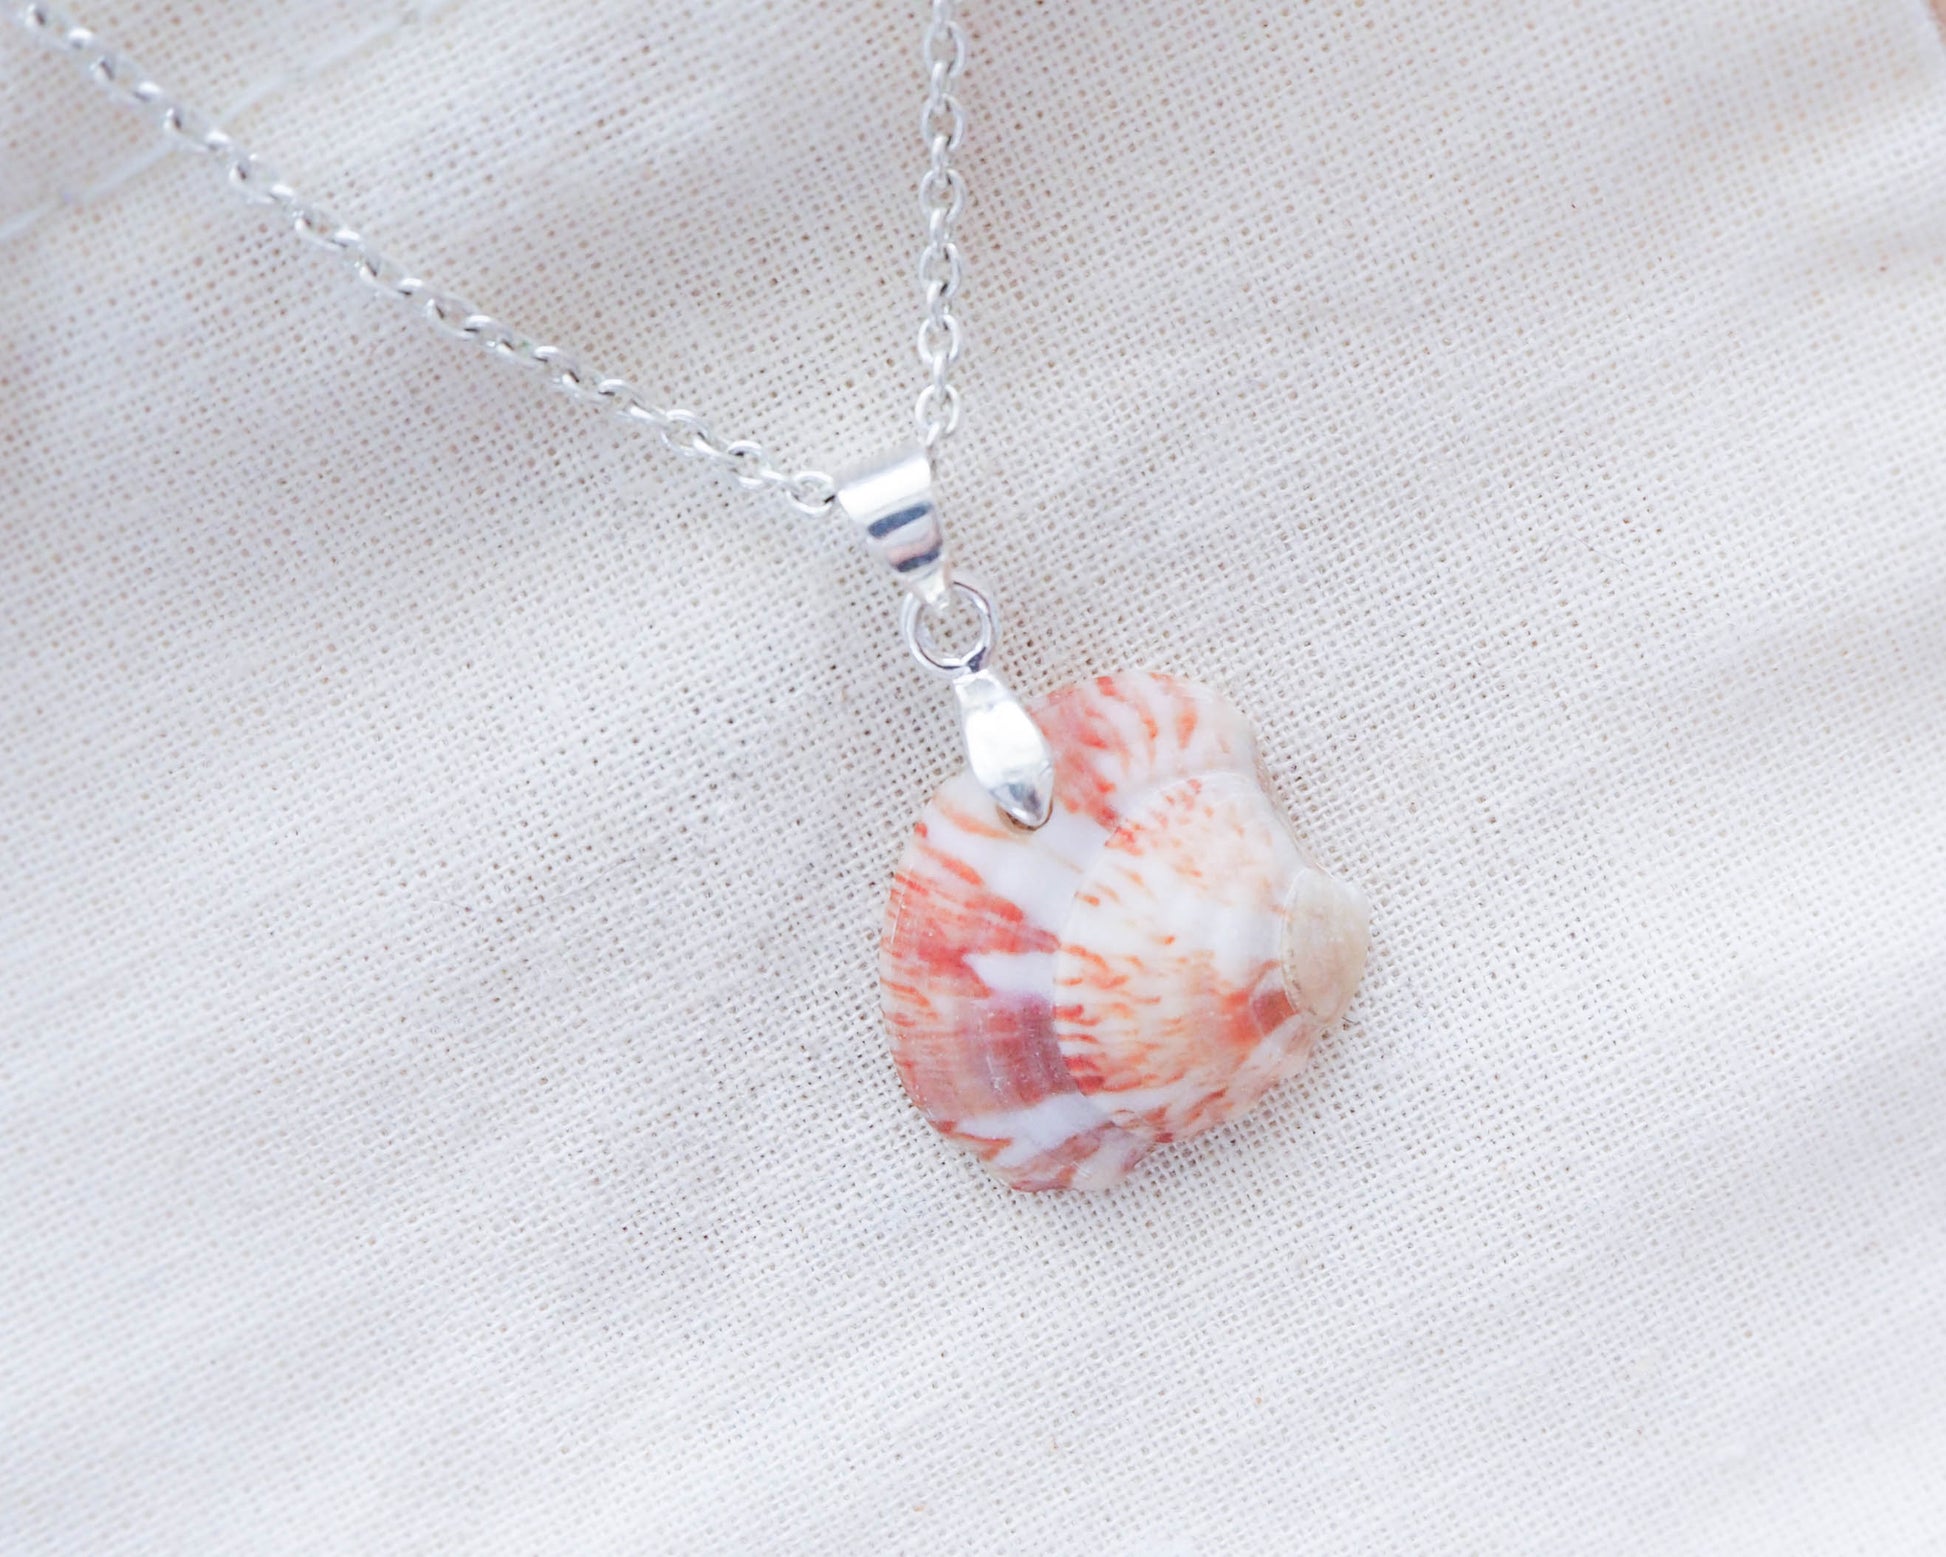 Banded Seashell Pink White Marmer Pendant - Silver Charm from Algarve, Portugal - Coastal Elegance and Natural Beauty - Handcrafted Jewelry